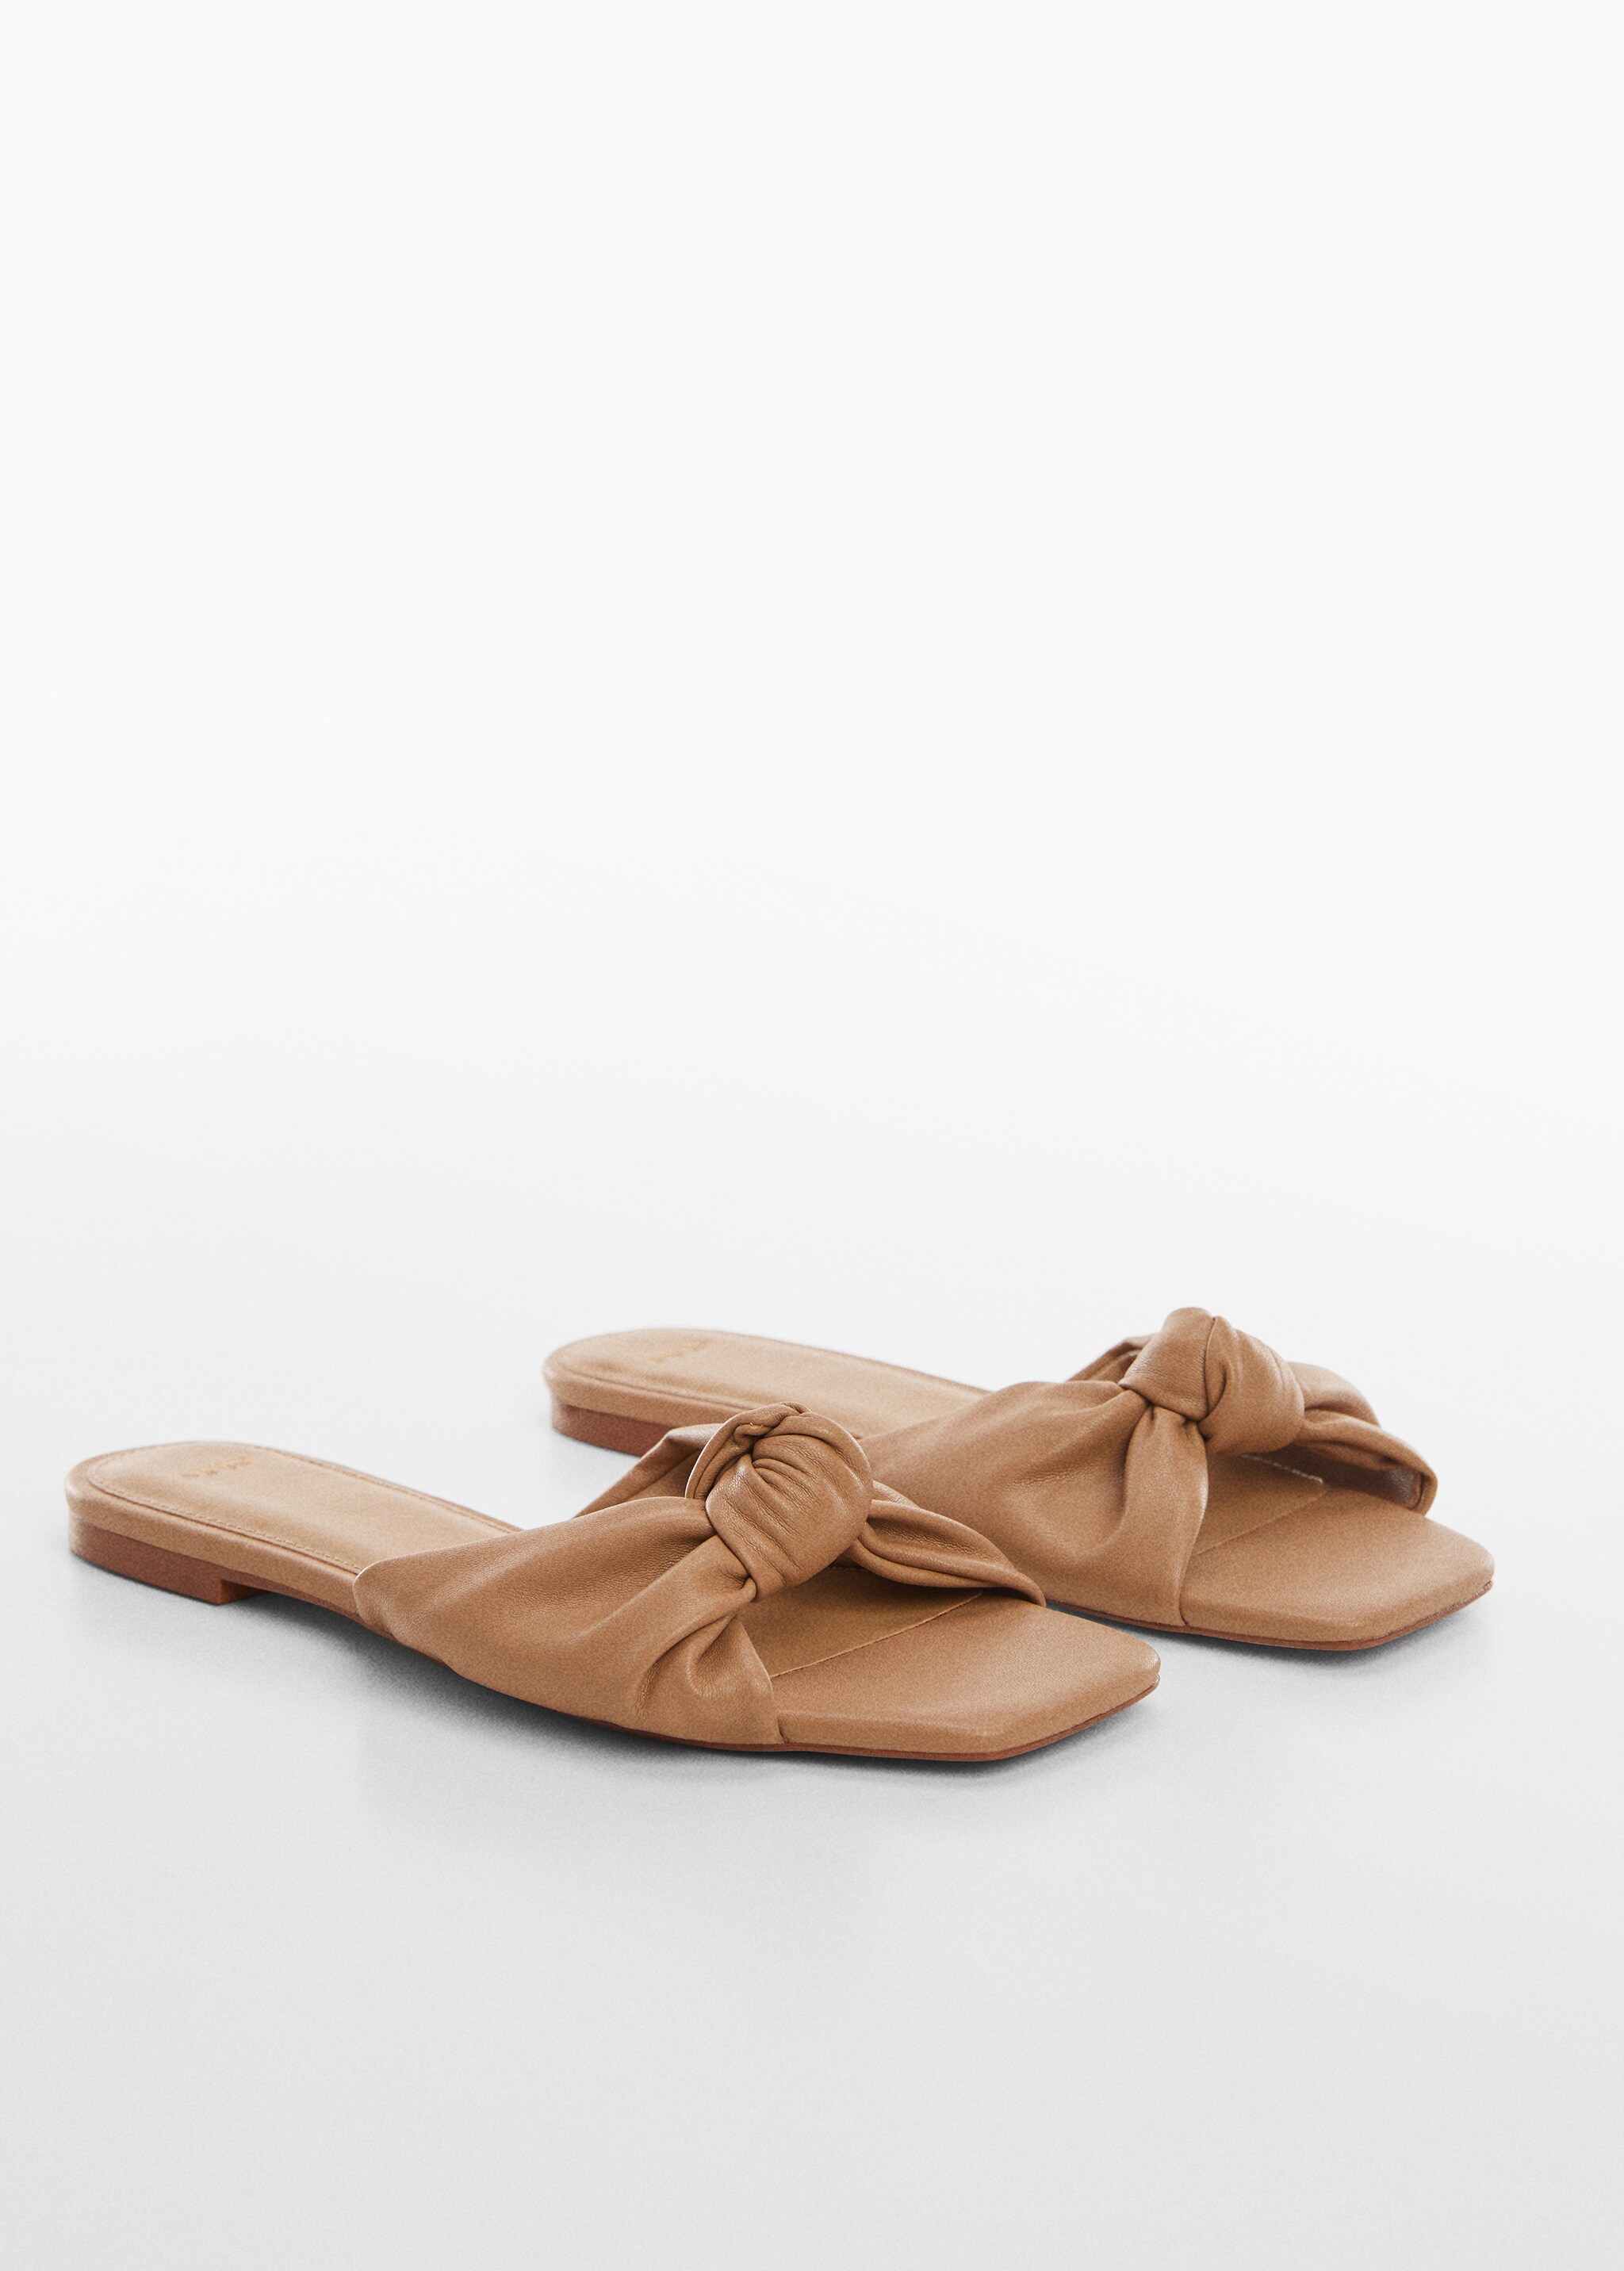 Square-toe sandals with knot detail - Medium plane